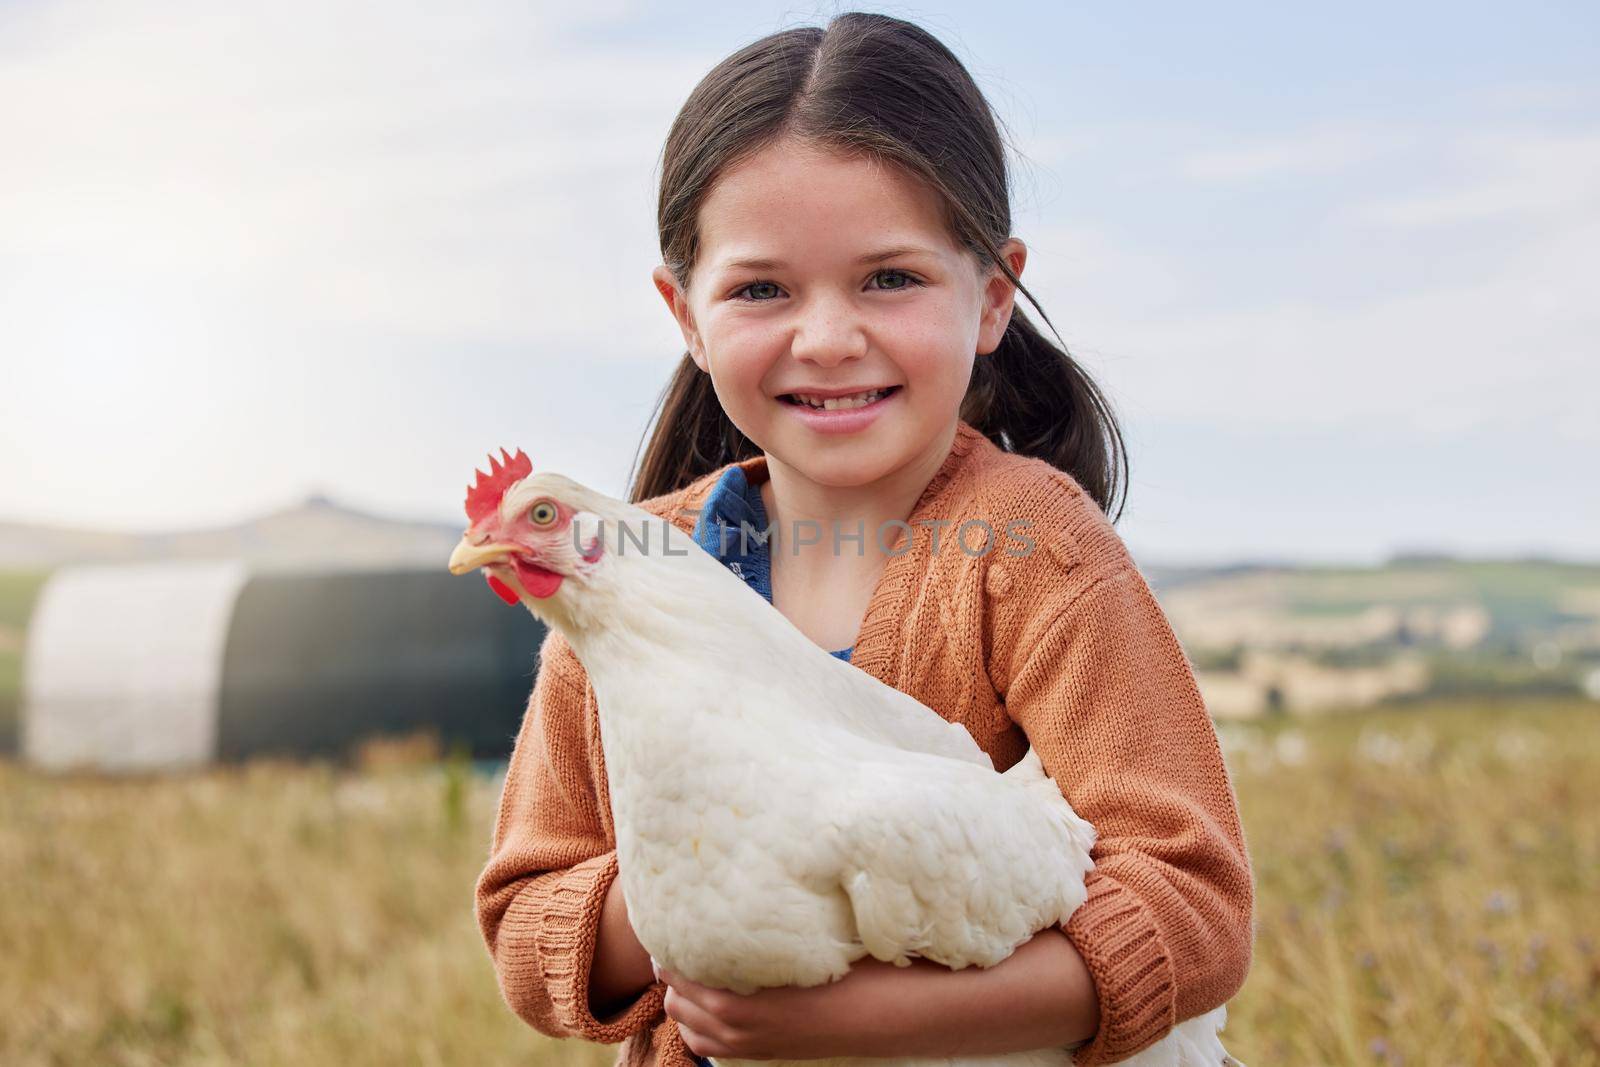 I help take care of the animals on our farm. an adorable little girl holding a chicken on a farm. by YuriArcurs